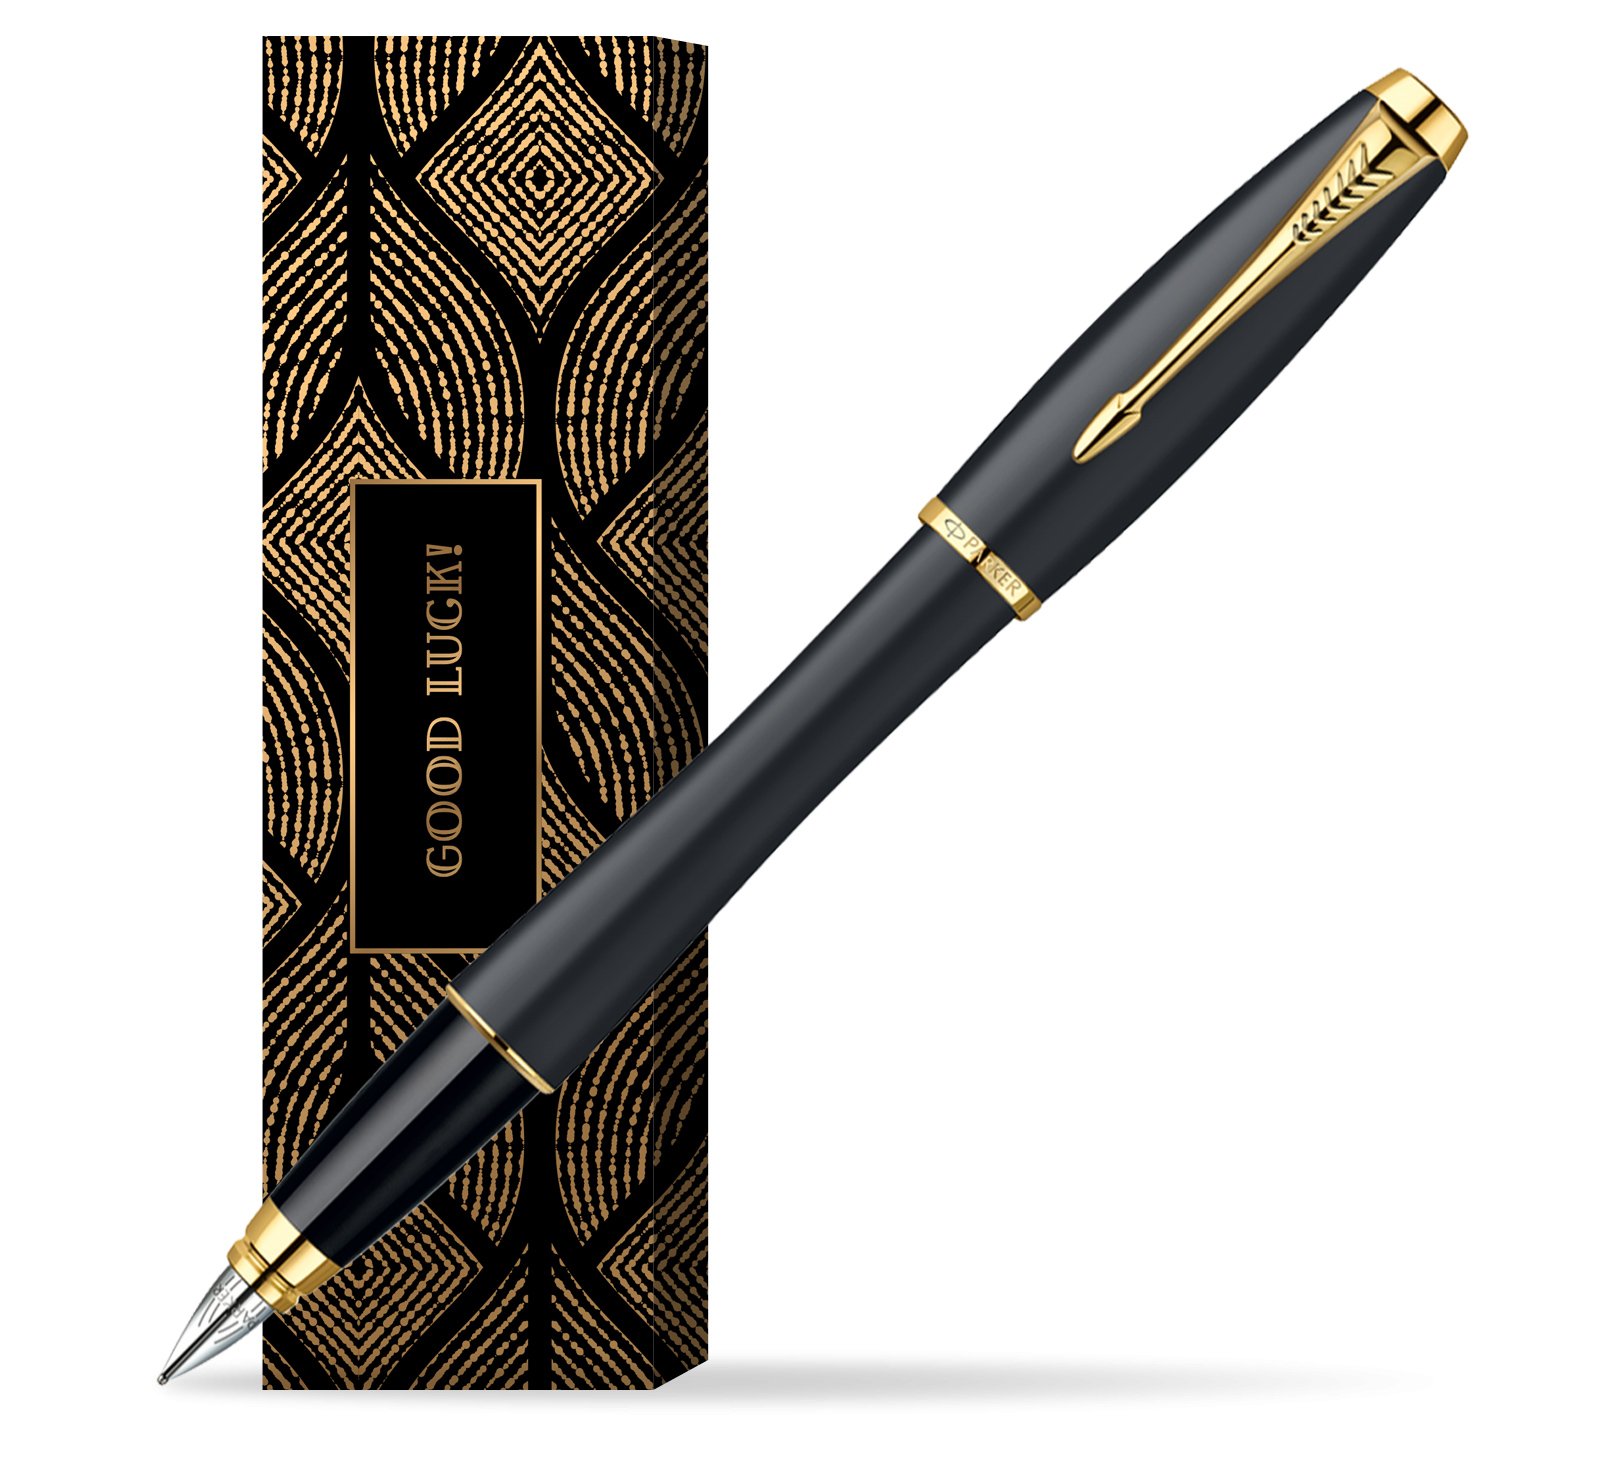 Parker Urban Muted Black Lacquer Fountain Pen in cover Good fortune in cover Good fortune S0850640_O109E